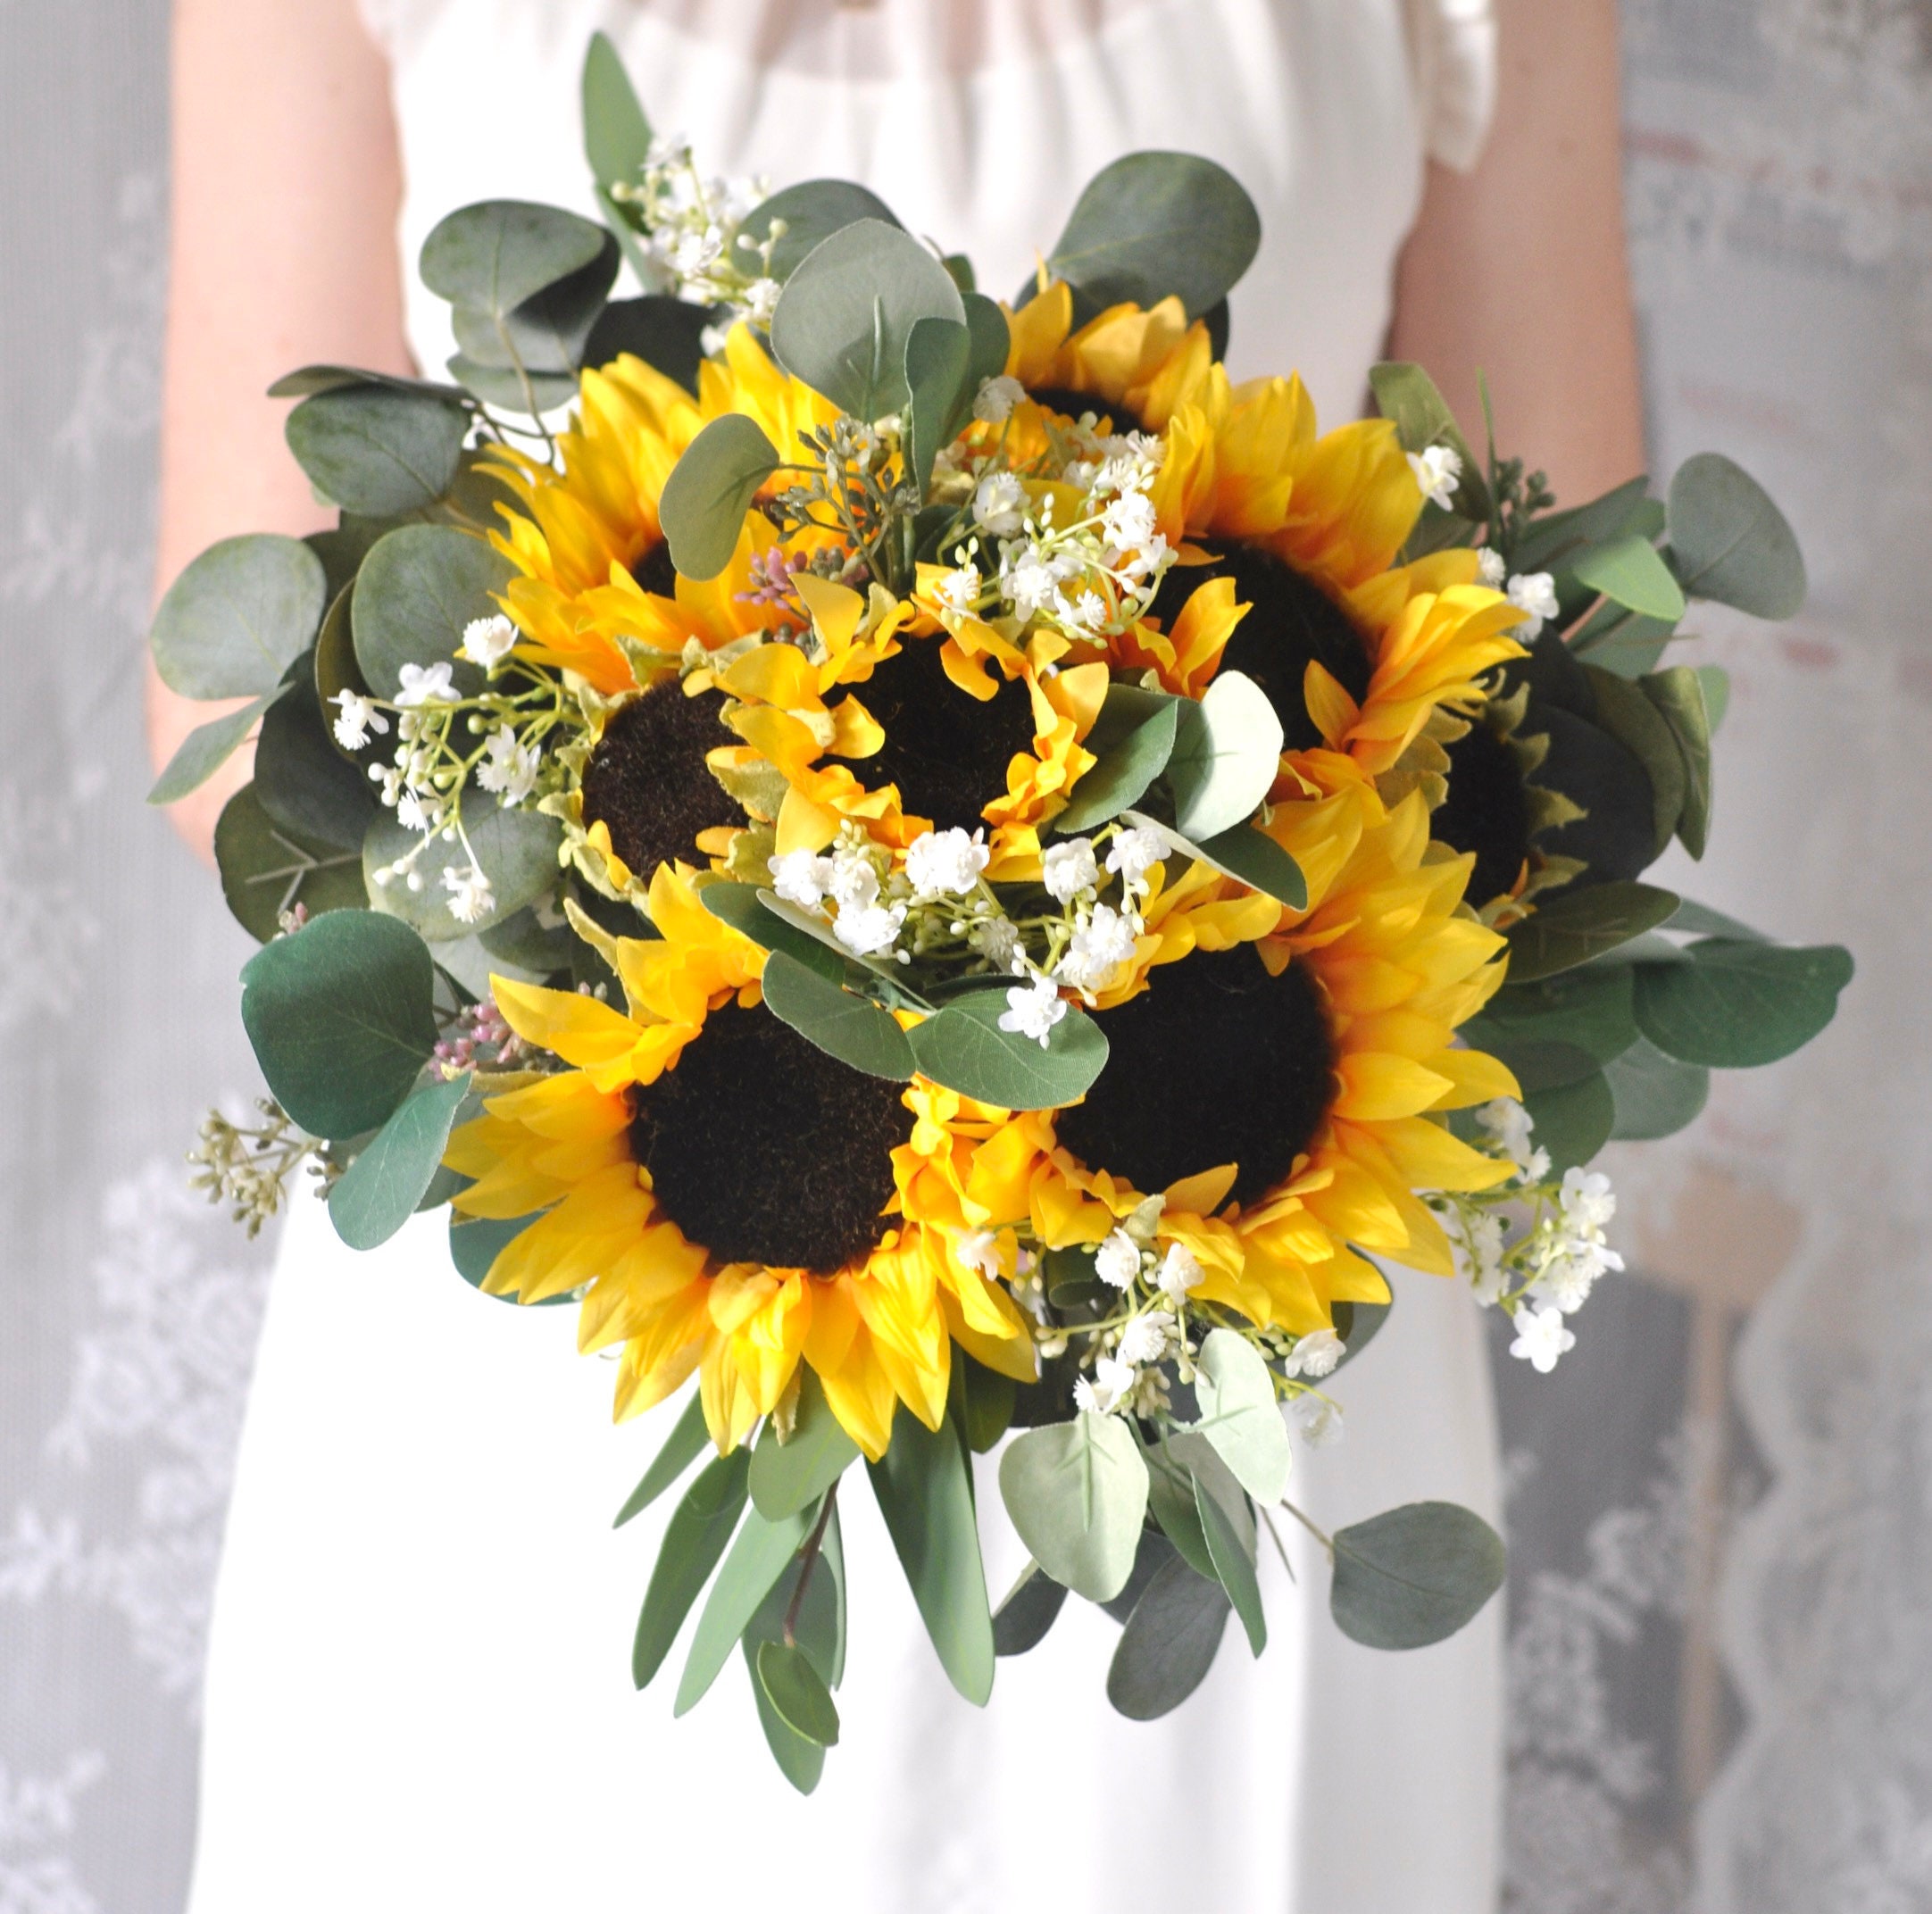 WISTART 12PCS Sunflowers Artificial Flowers Silk Flower with Stems Yellow  Sunflower Bridal Wedding Bouquet Decorations for Home Wedding Party  Birthday